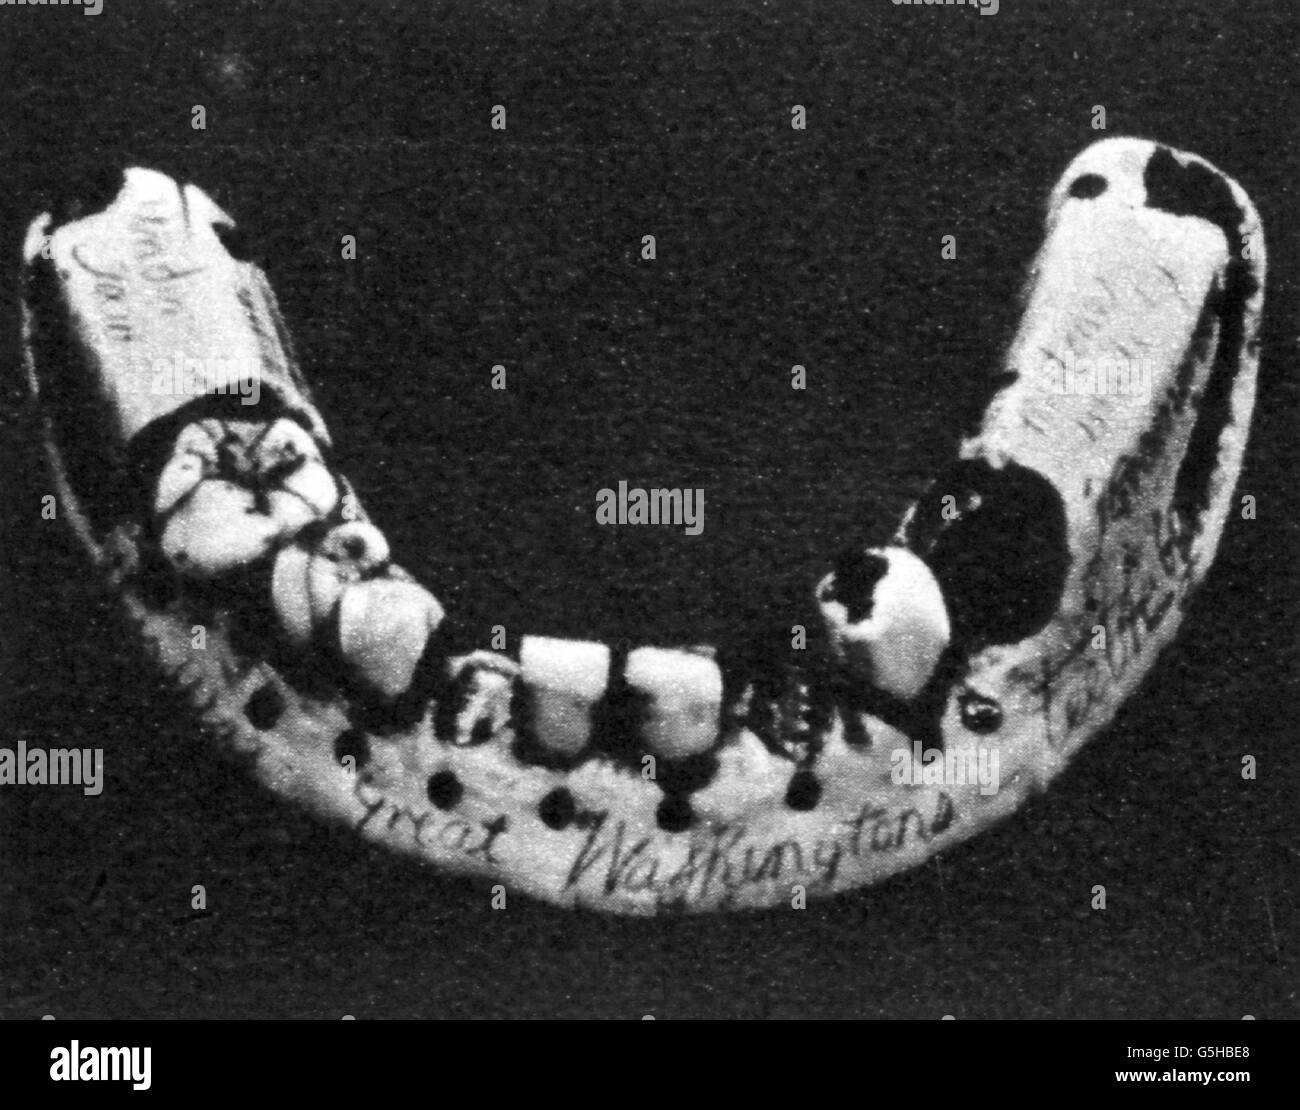 Washington, George, 22.2.1732 - 14.12.1799, American general and politician, president 1789 - 1797, denture, manufactured by dentist John Greenwood, out of a hippopotamus tooth, 18th century, Stock Photo